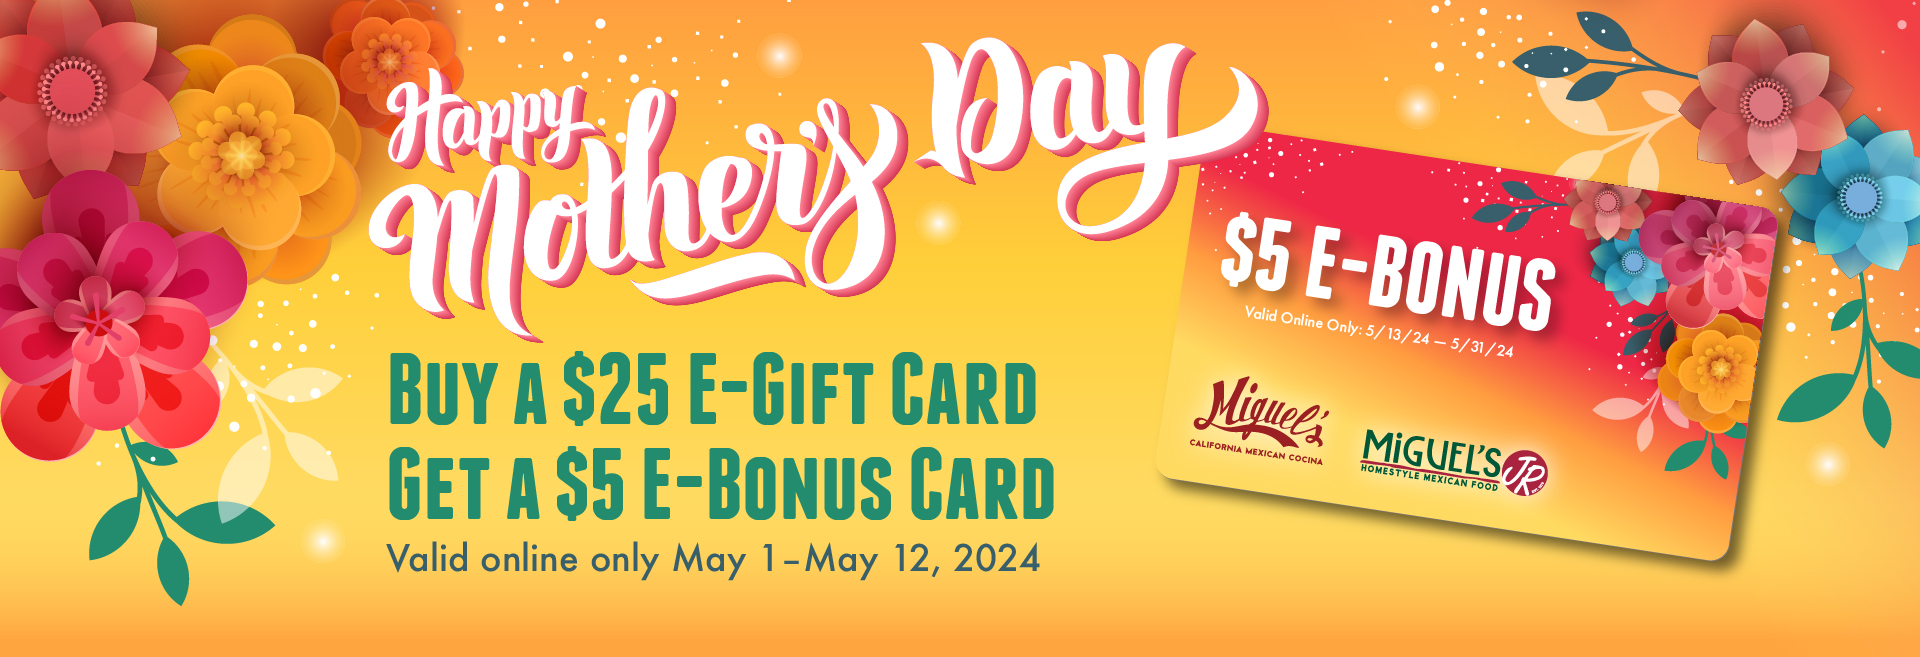 Mother's Day promotion: Buy a $25 E-Gift Card, get a $5 E-Bonus Card. Valid online from May 1 to May 12, 2024.